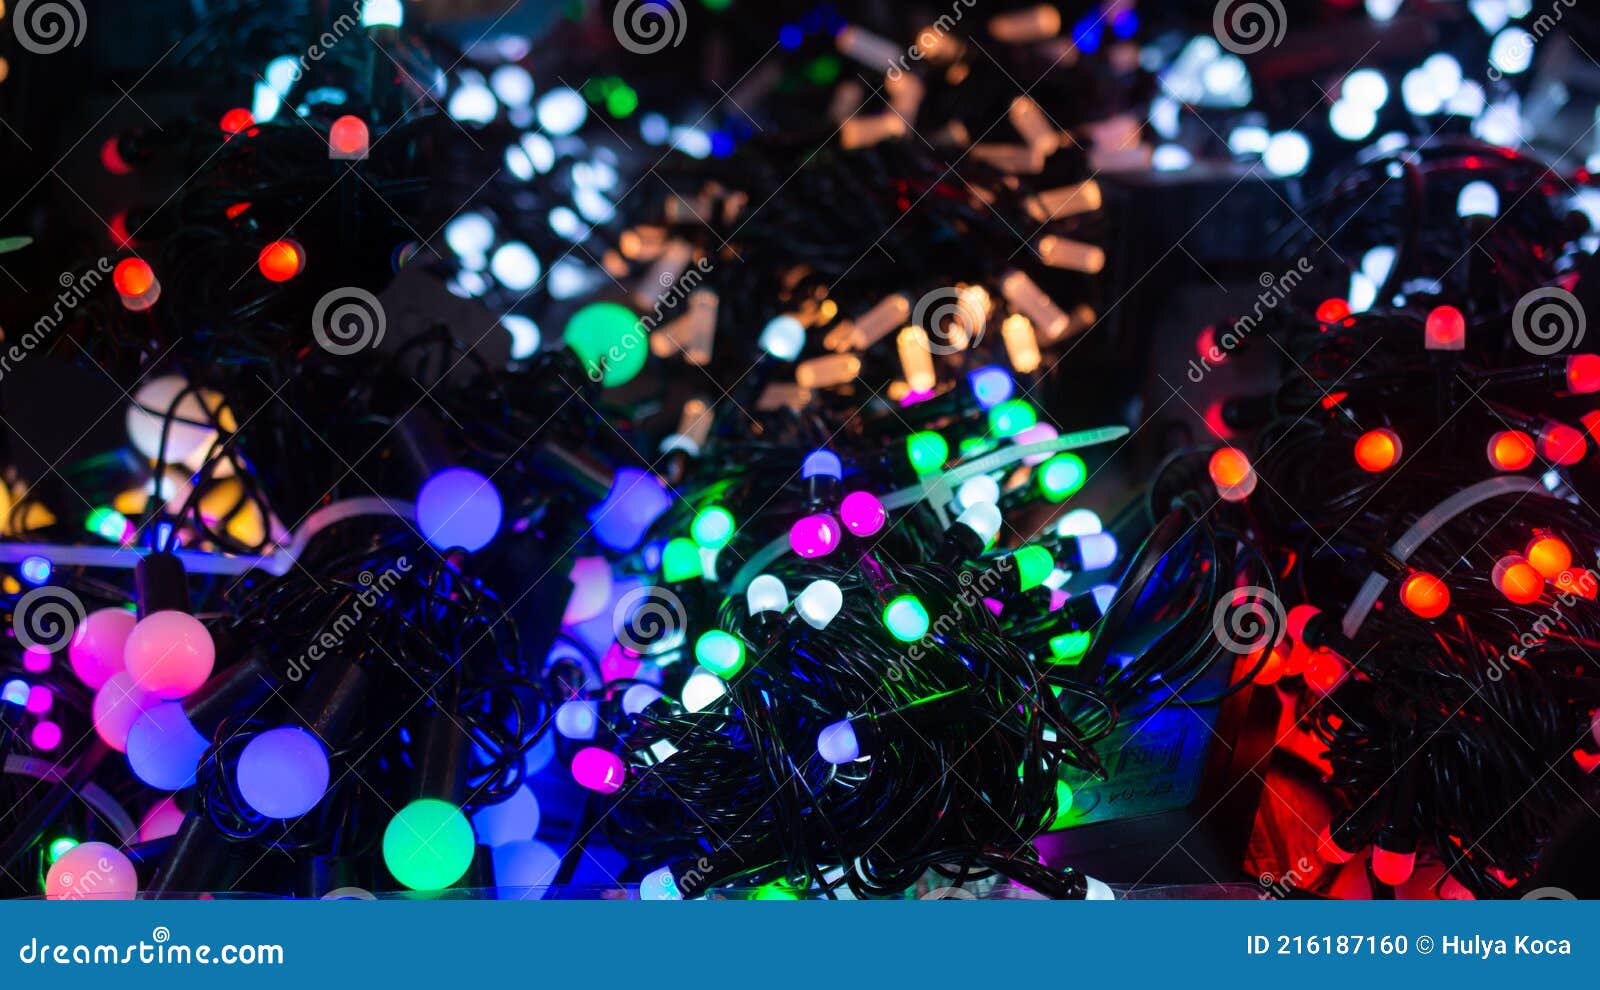 Colorful Christmas Lights and Party Lights Stock Photo - Image of ...